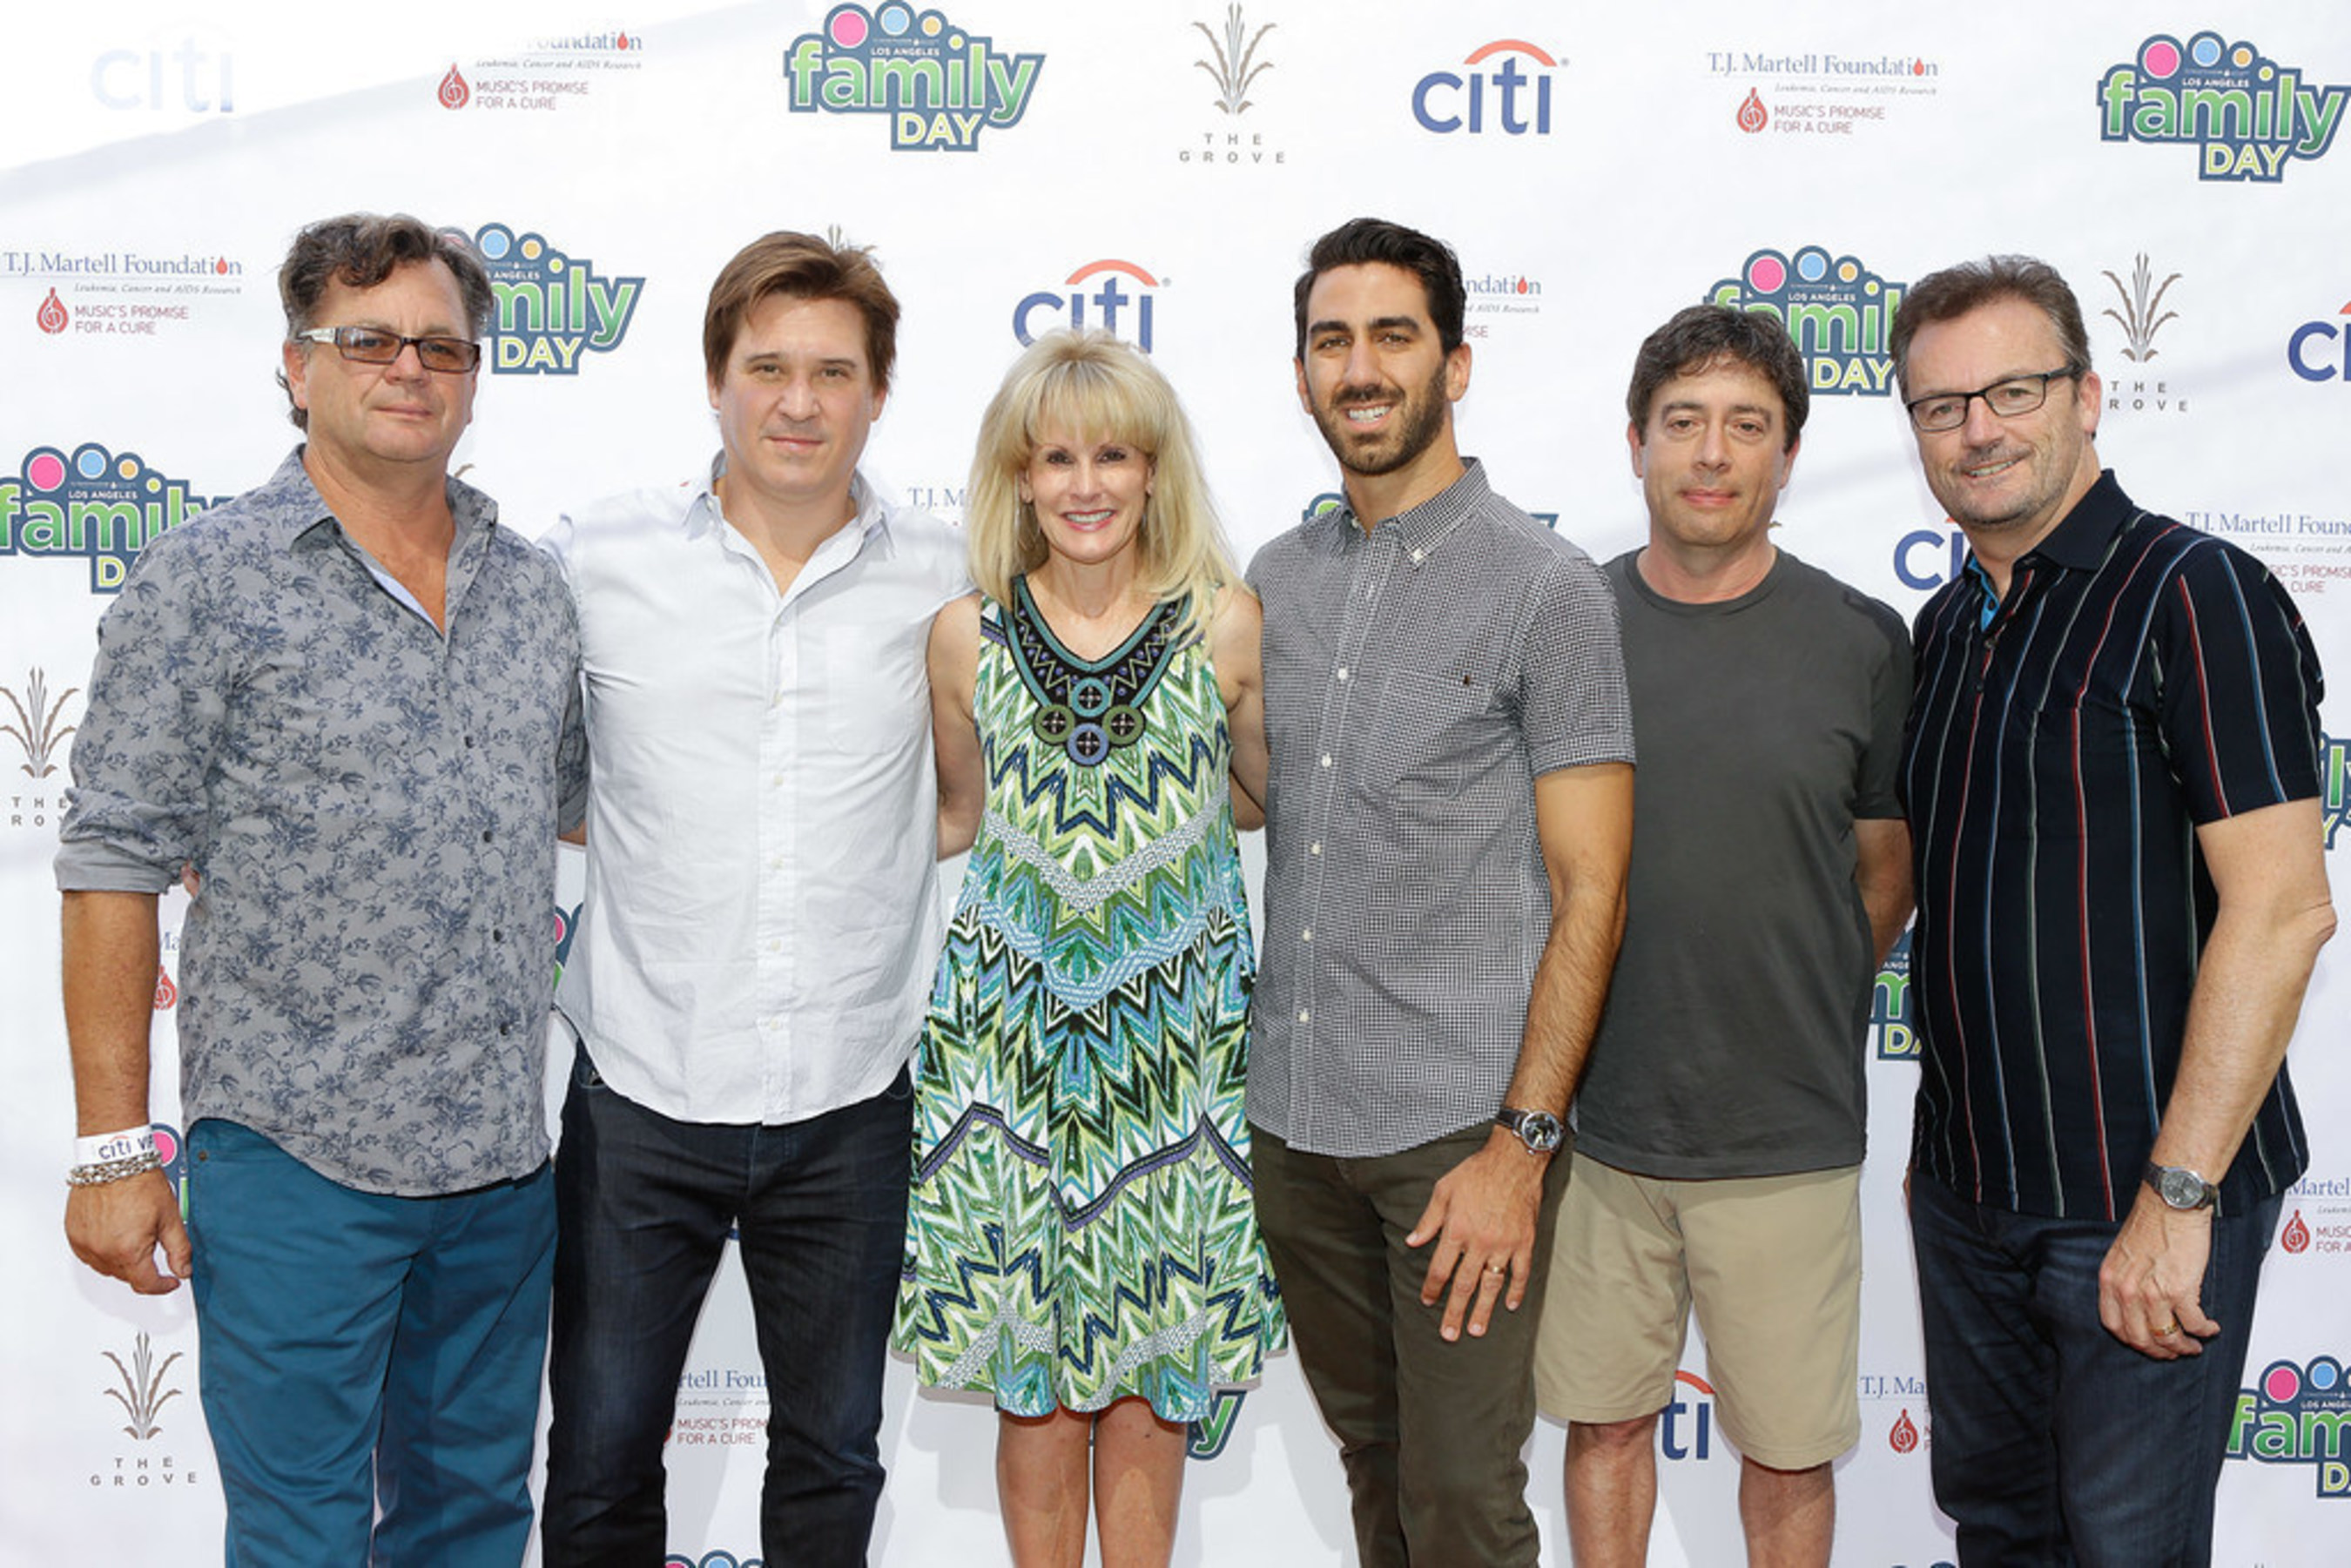 Honorees at the T.J. Martell Los Angeles Family Day held at The Grove in L.A. on Sunday October 9th to benefit Children's Hospital. (l to r) Honoree Kevin Lyman, David Kovach, T.J. Martell Foundation CEO Laura Heatherly, Honoree George Strompolos, Rick Krim and Honoree Rob Lloyd. Photo Credit: Tiffany Rose